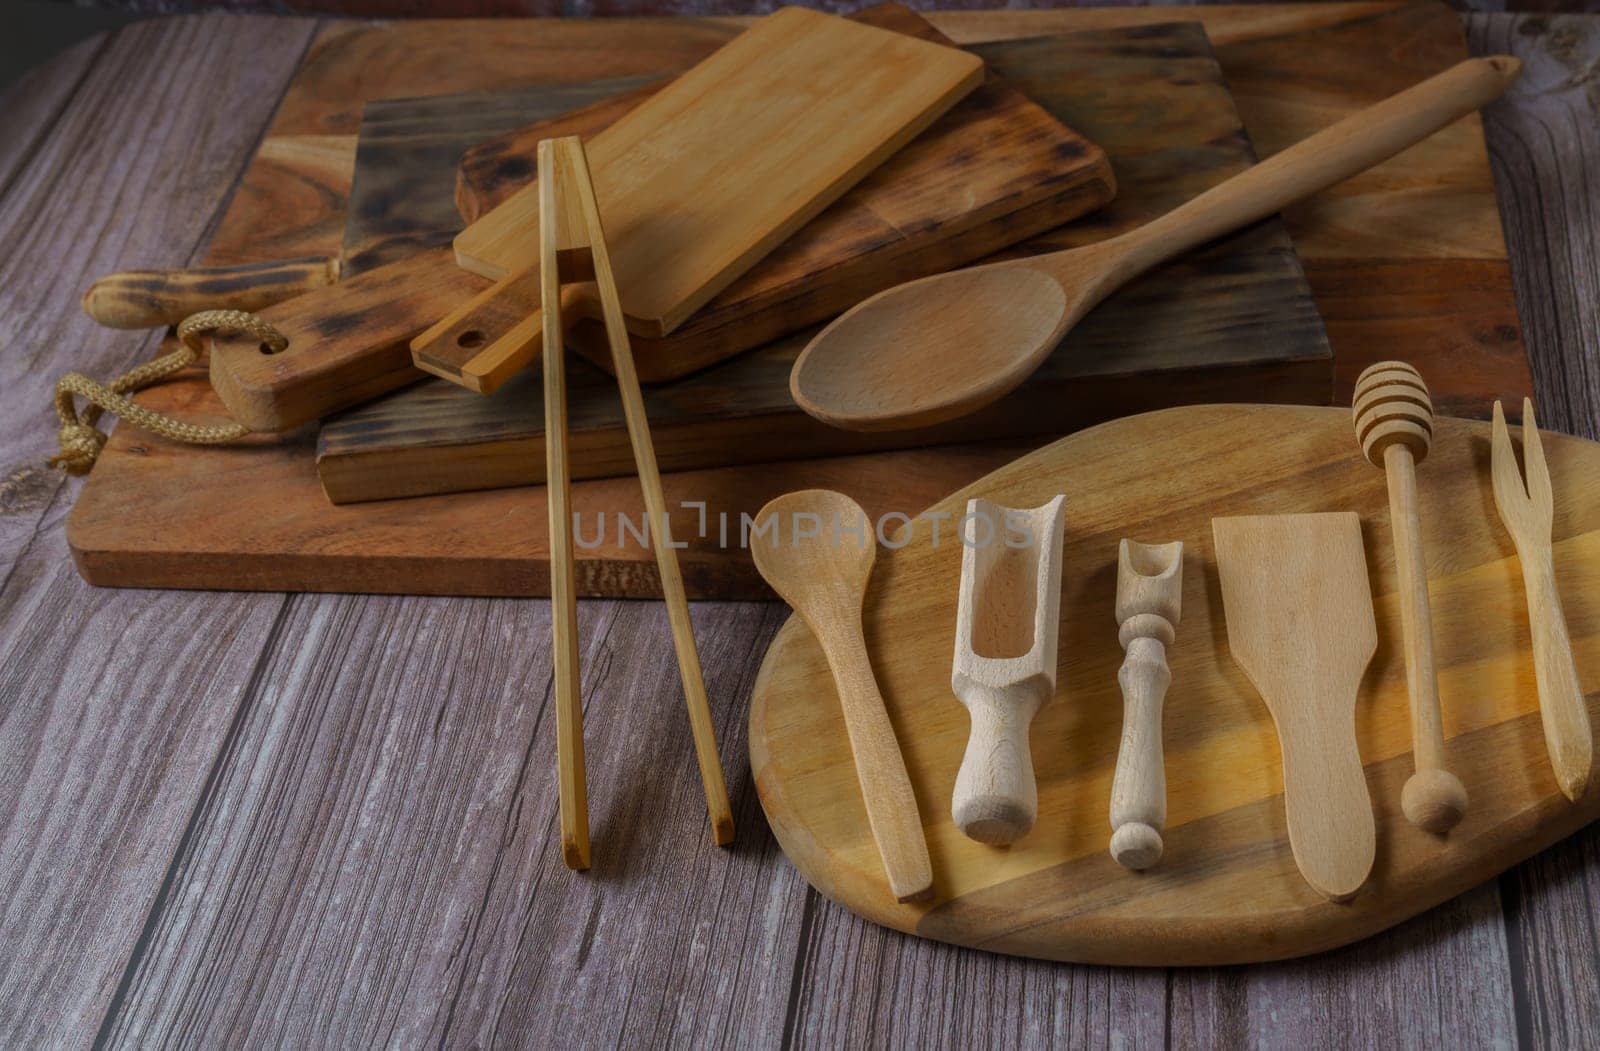 different types of wooden utensils used in the kitchen by joseantona